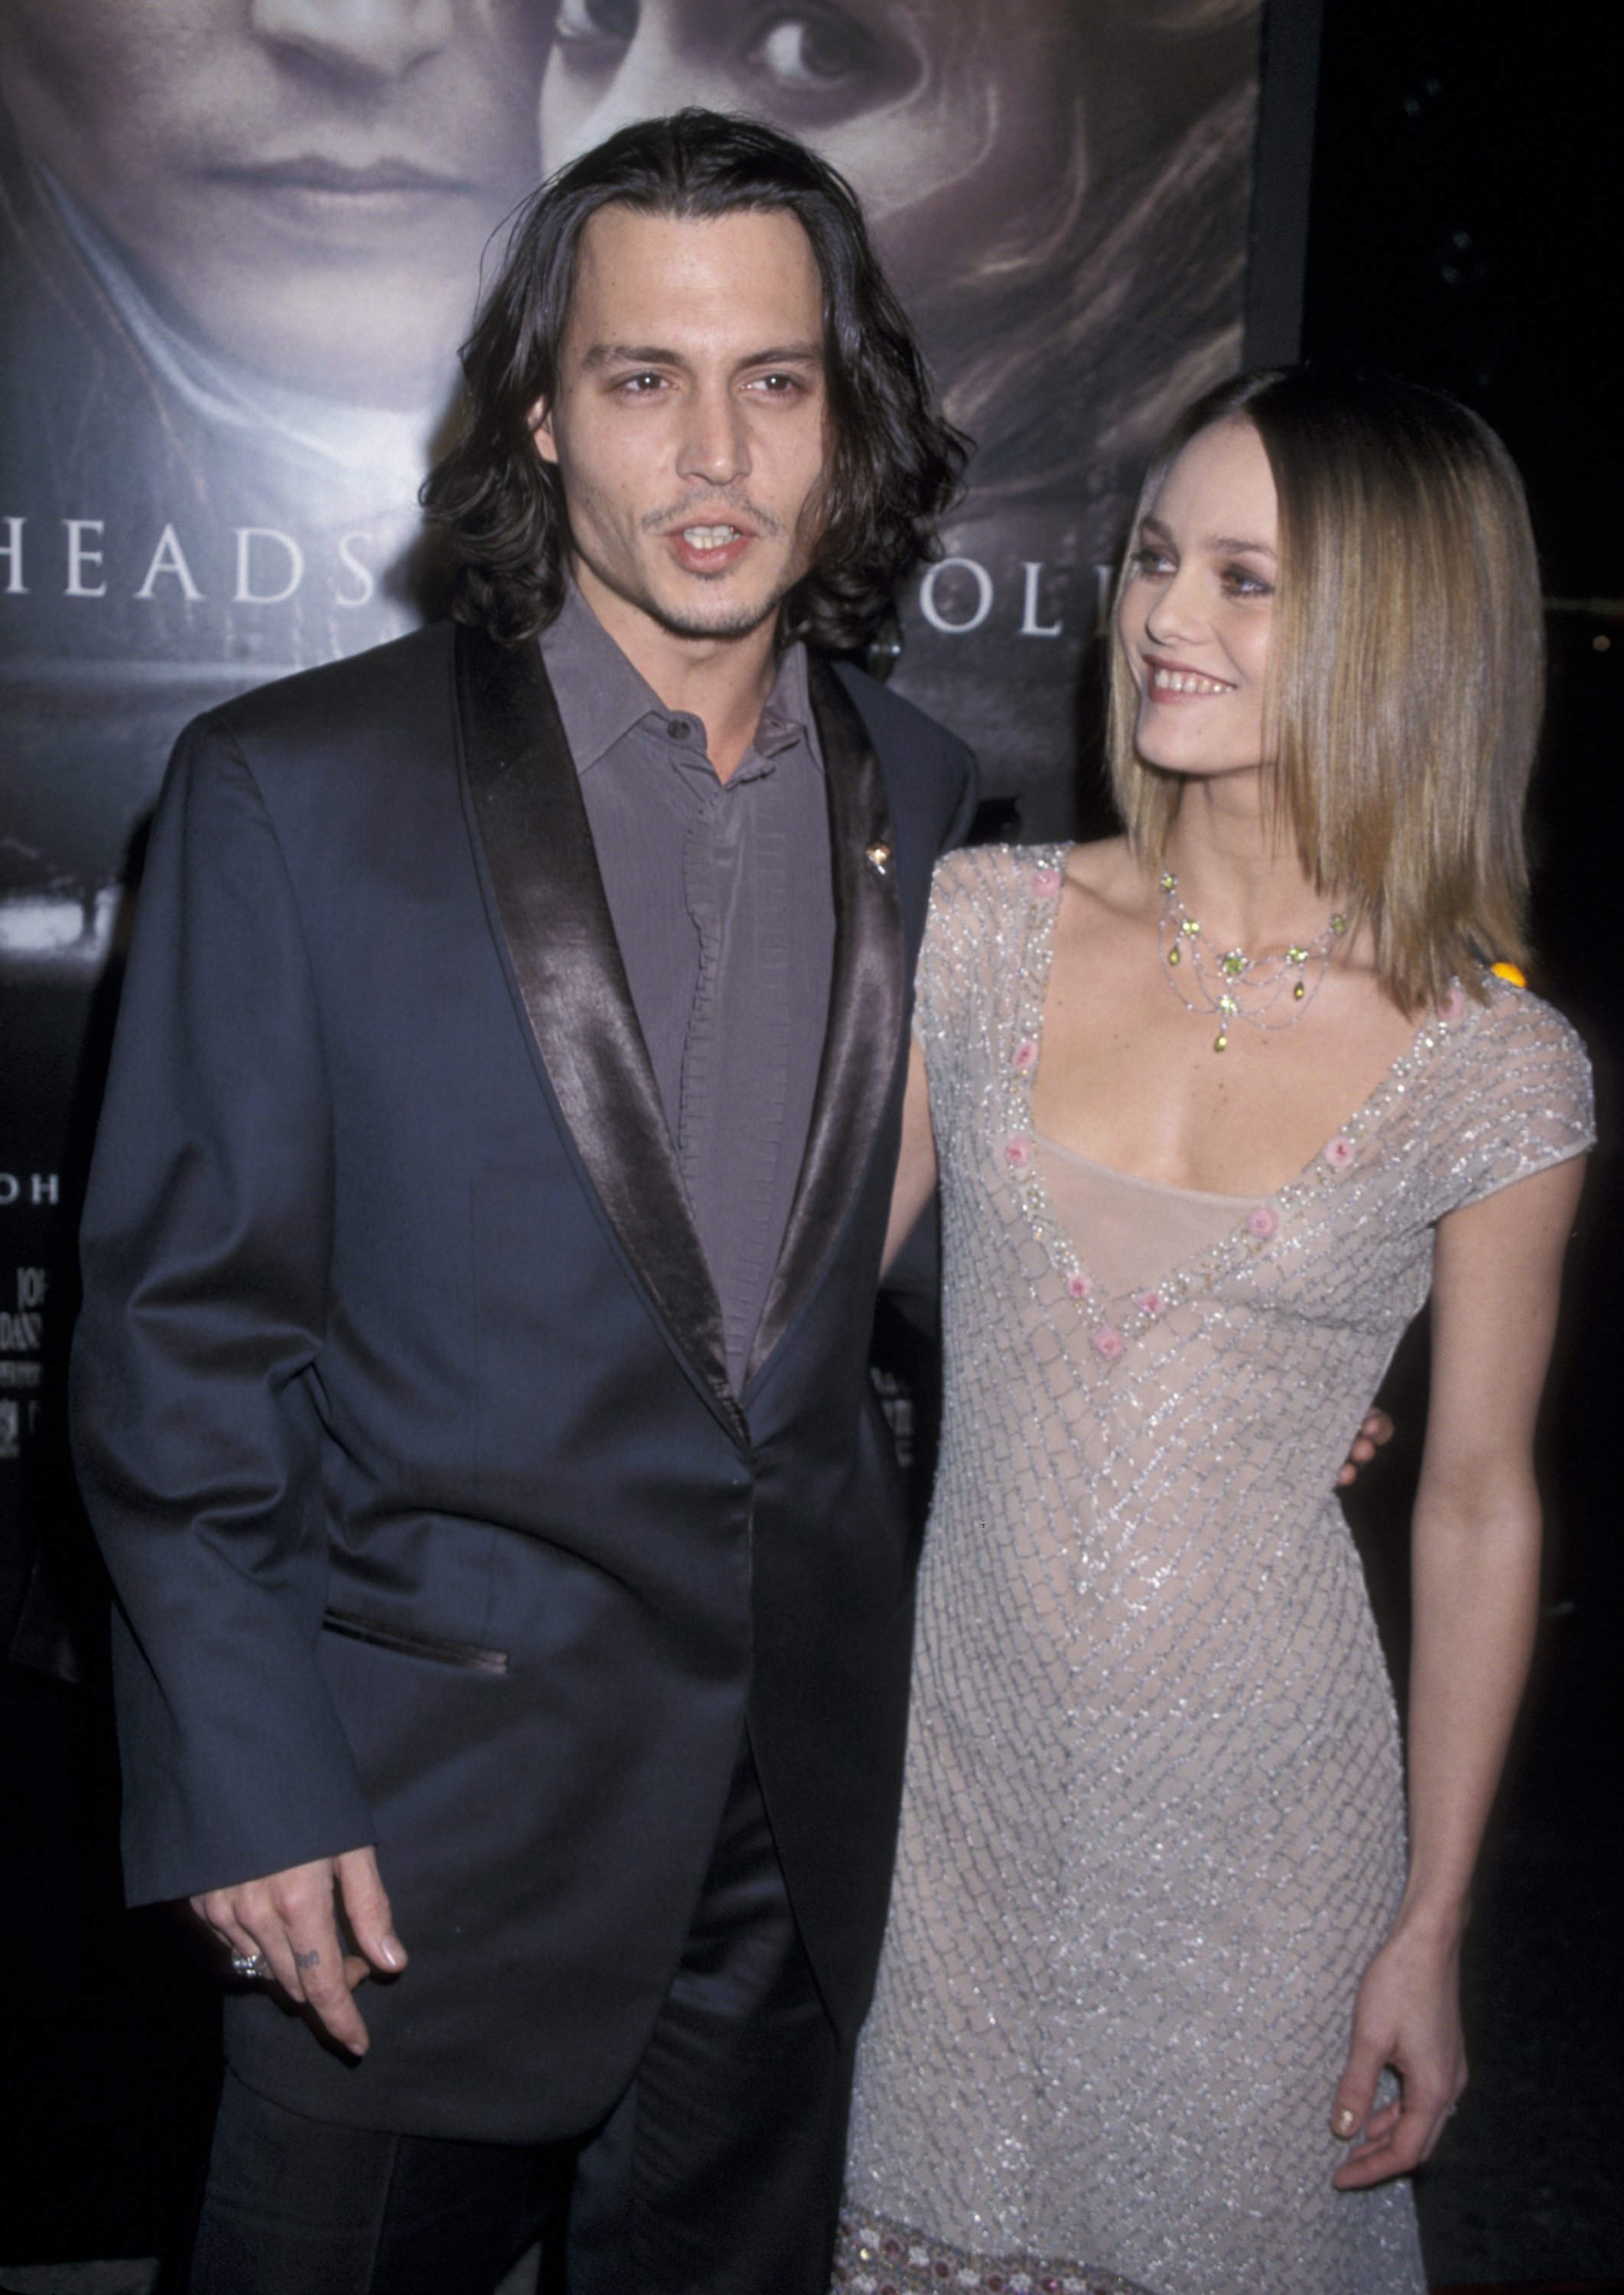 Johnny Depp and Vanessa Paradis arrive at the Premiere of Paramount Pictures' "Sleepy Hollow" at the Mann Chinese Theater on November 17, 1999 in Hollywood, California | Source: Getty Images